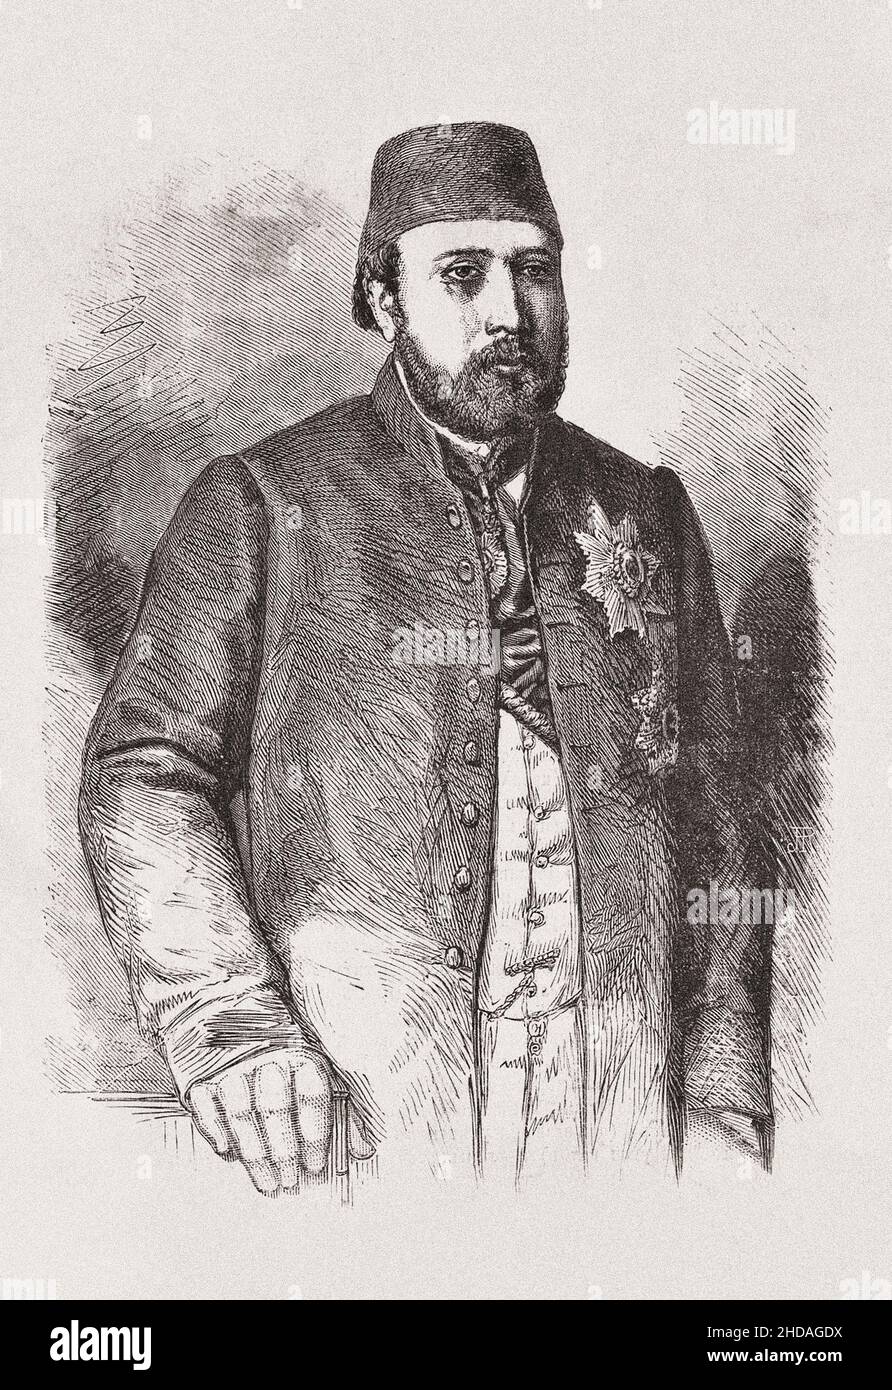 Portrait of Isma'il Pasha.  Isma'il Pasha, known as Ismail the Magnificent (1830 – 1895), was the Khedive of Egypt and conqueror of Sudan from 1863 to Stock Photo